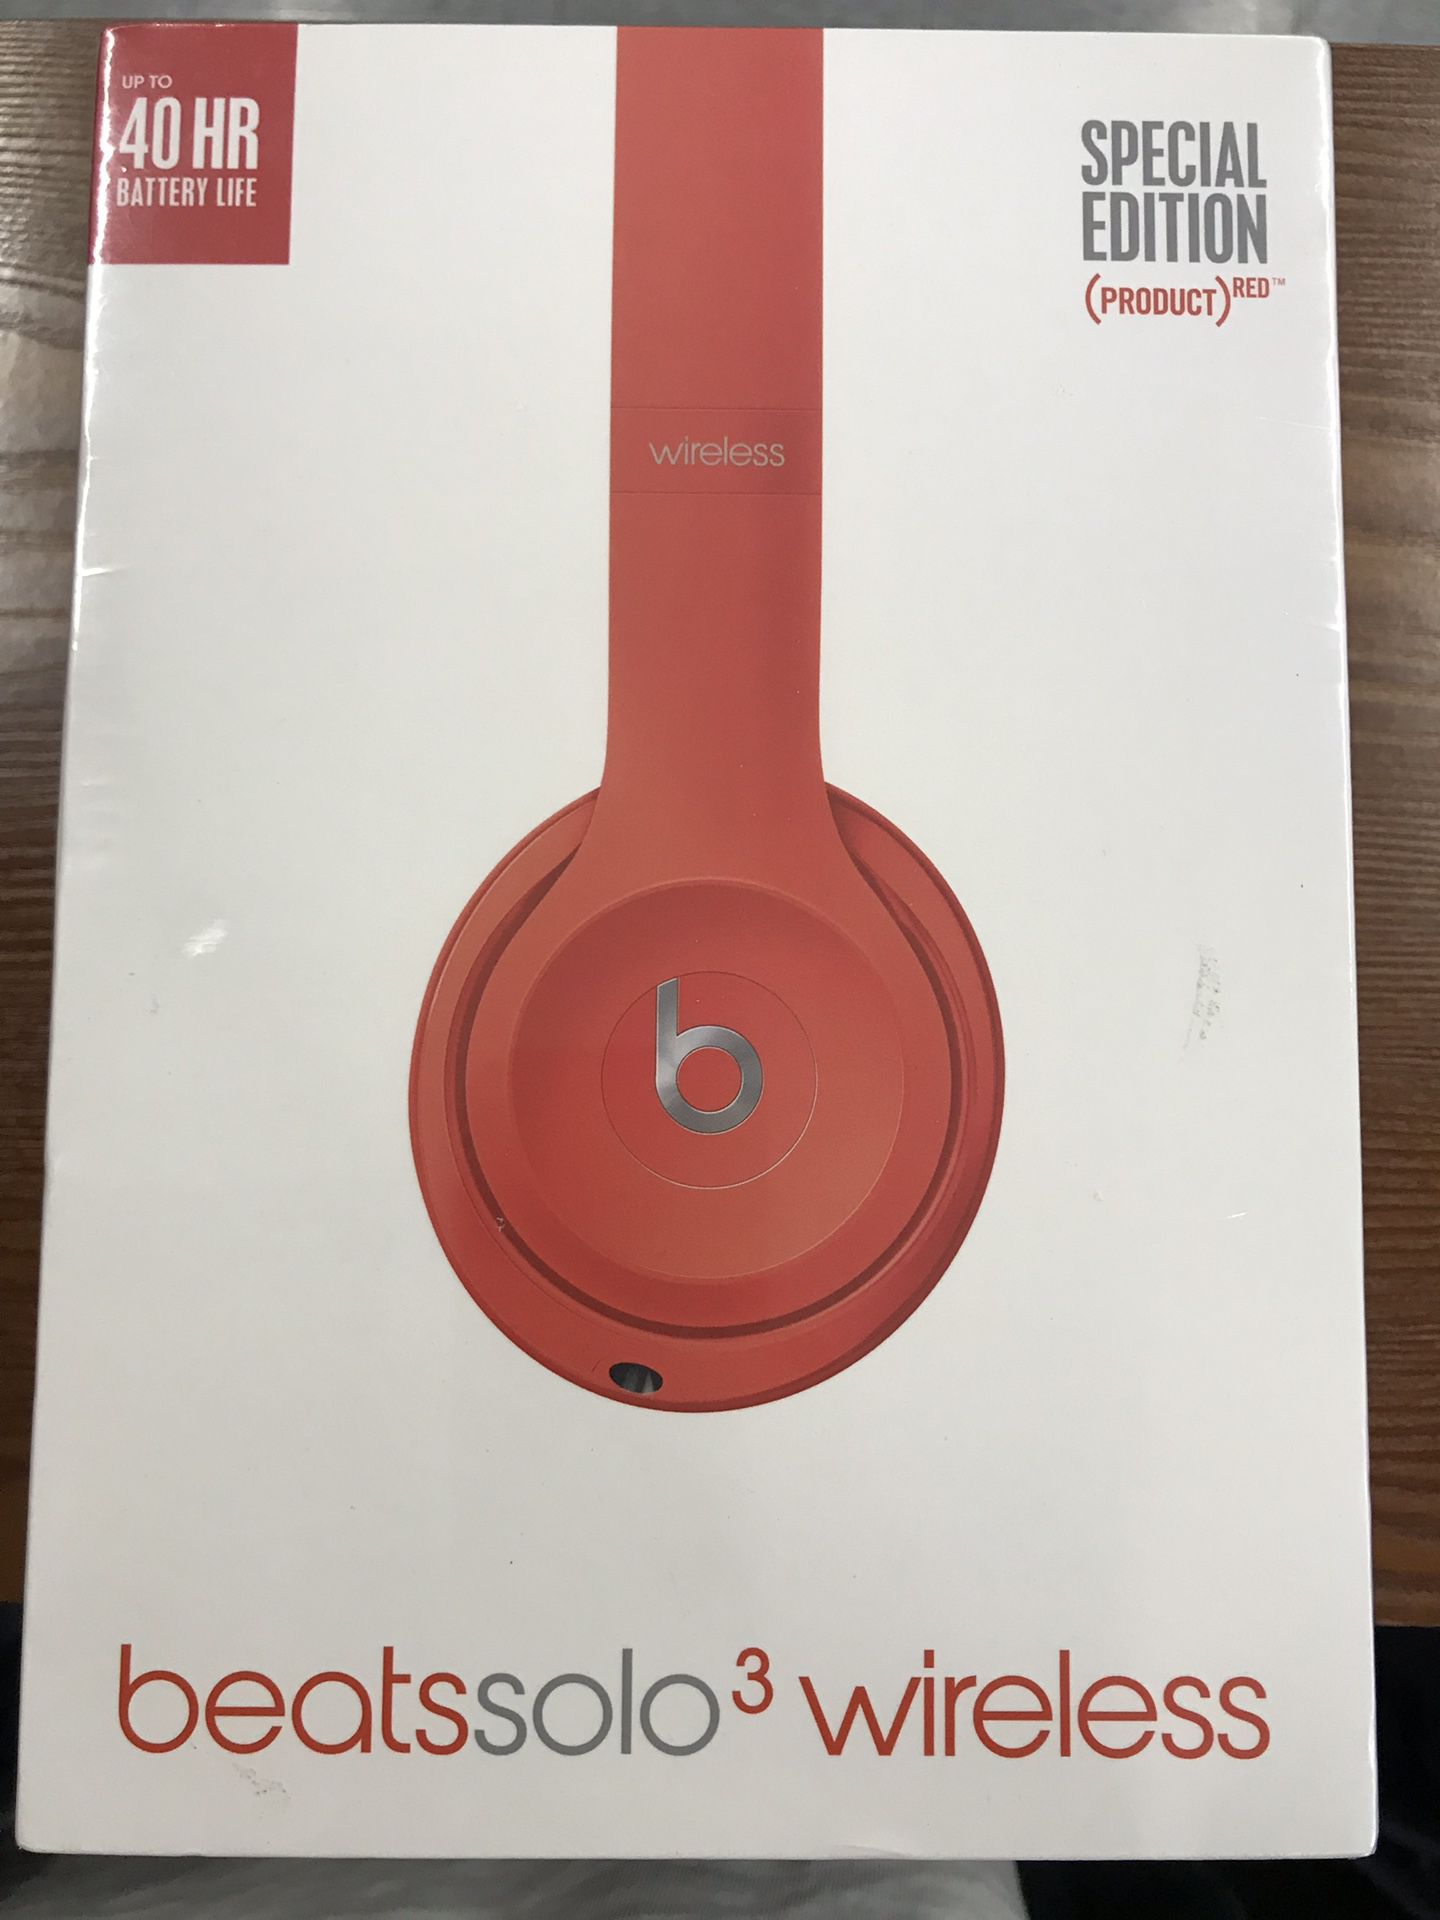 Brand new sealed beats solo 3 wireless product red special edition